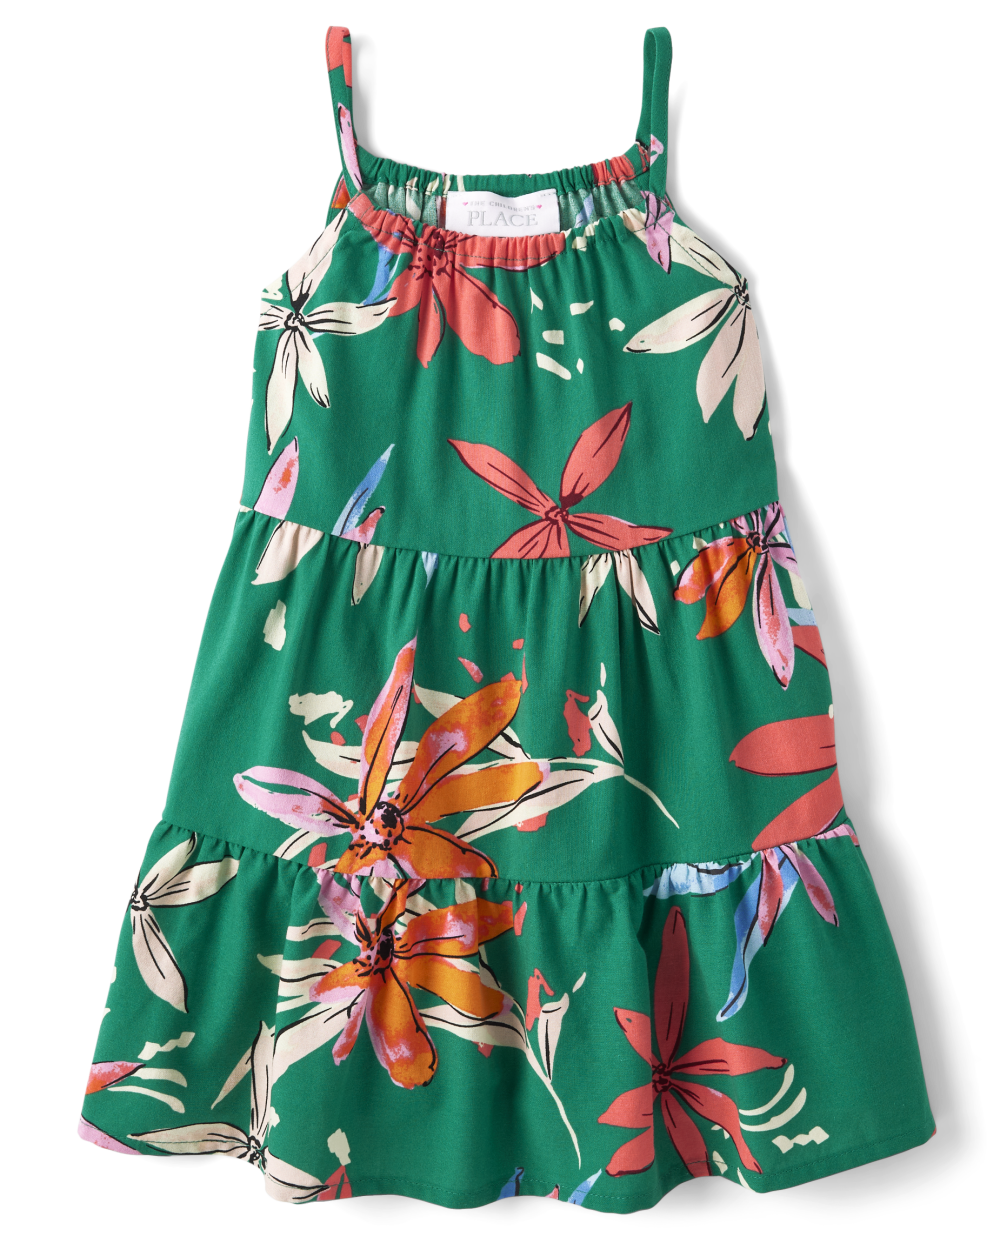 Toddler Tiered Above the Knee Sleeveless Halter Floral Print Dress